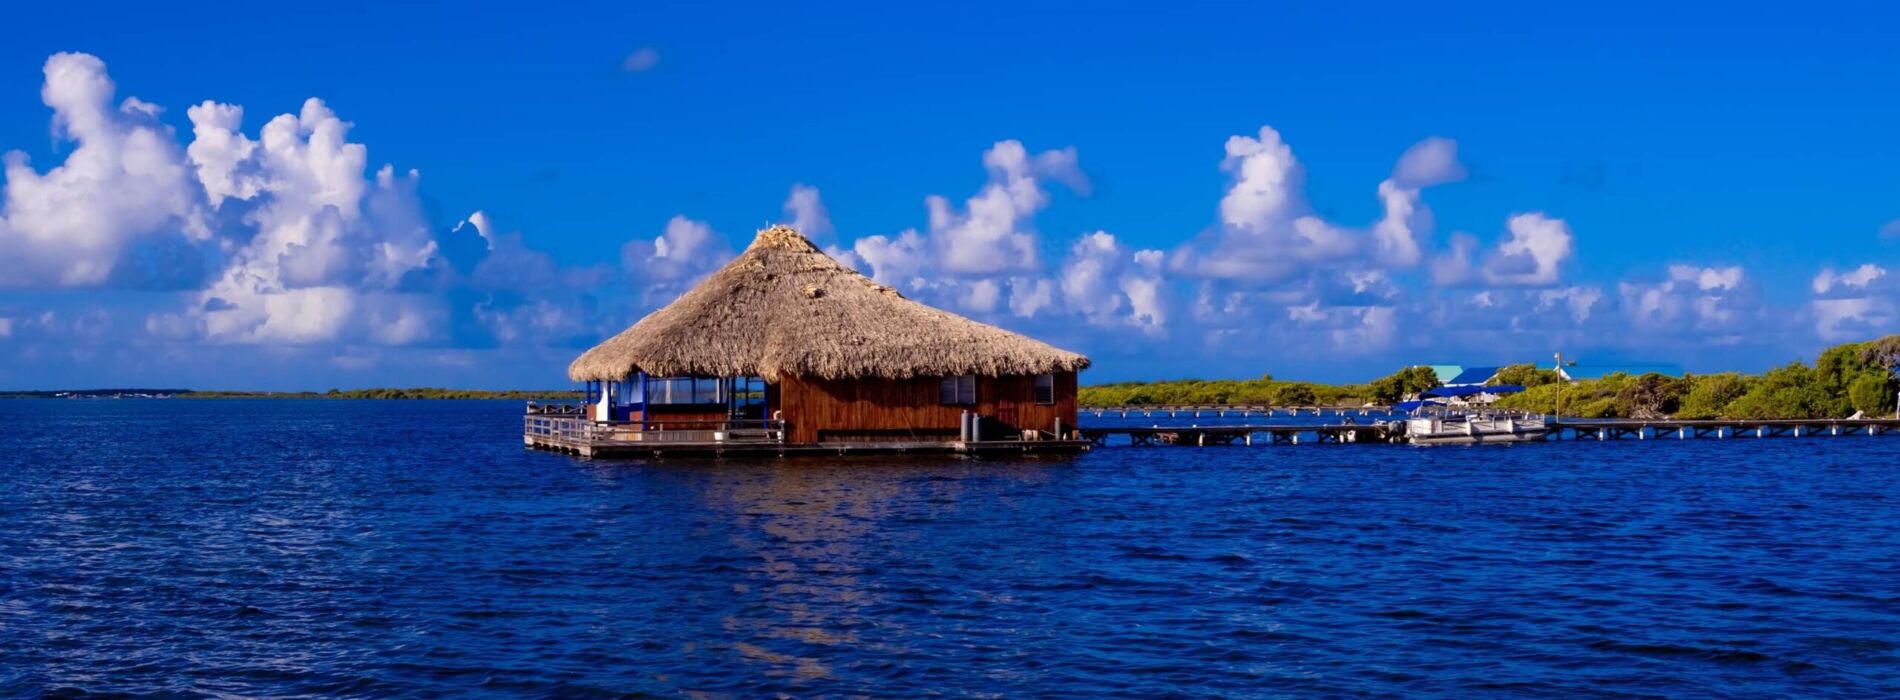 Belize all inclusive packages